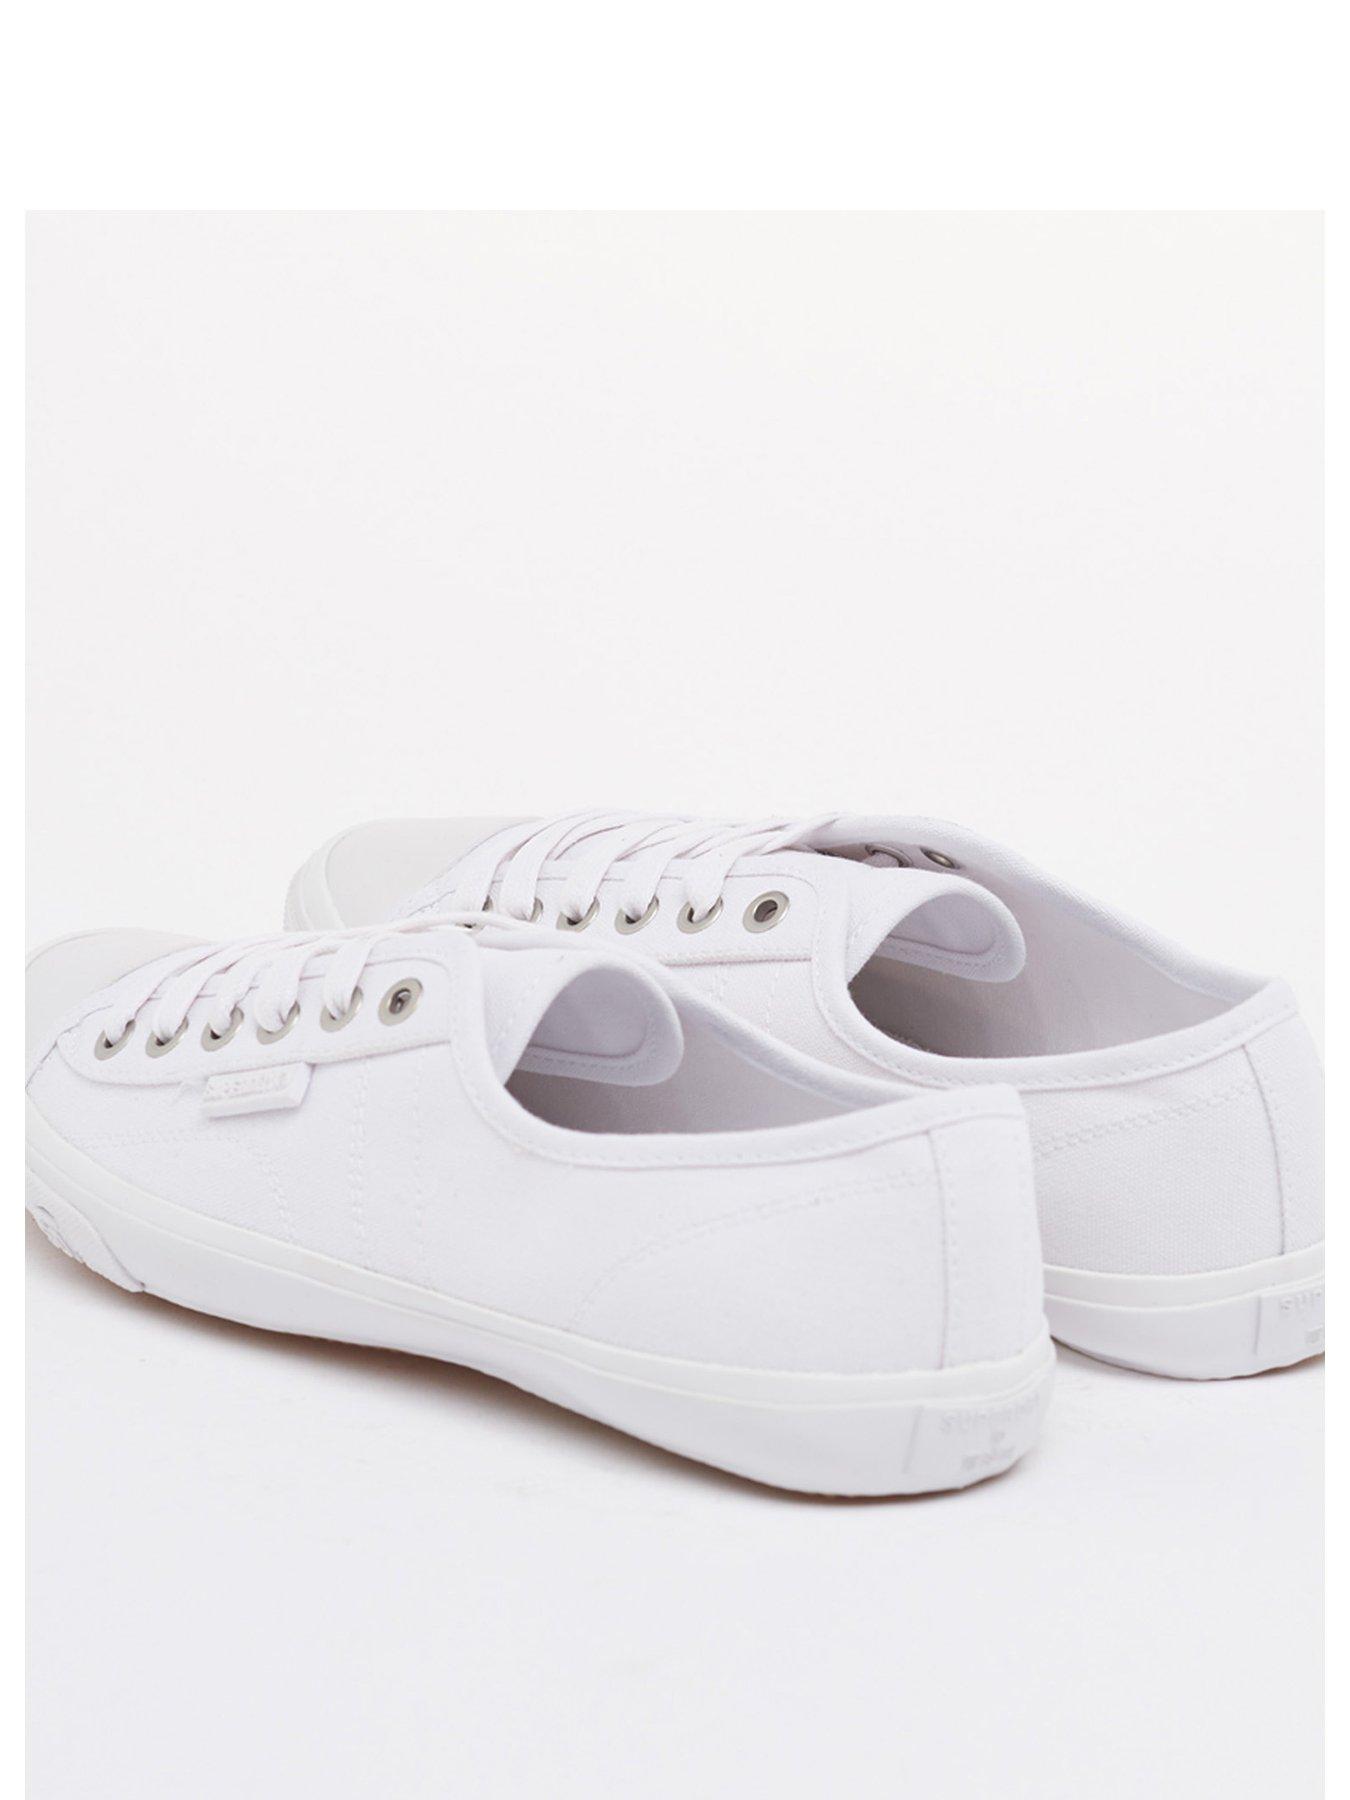 Superdry Low Pro Trainer - White | very.co.uk